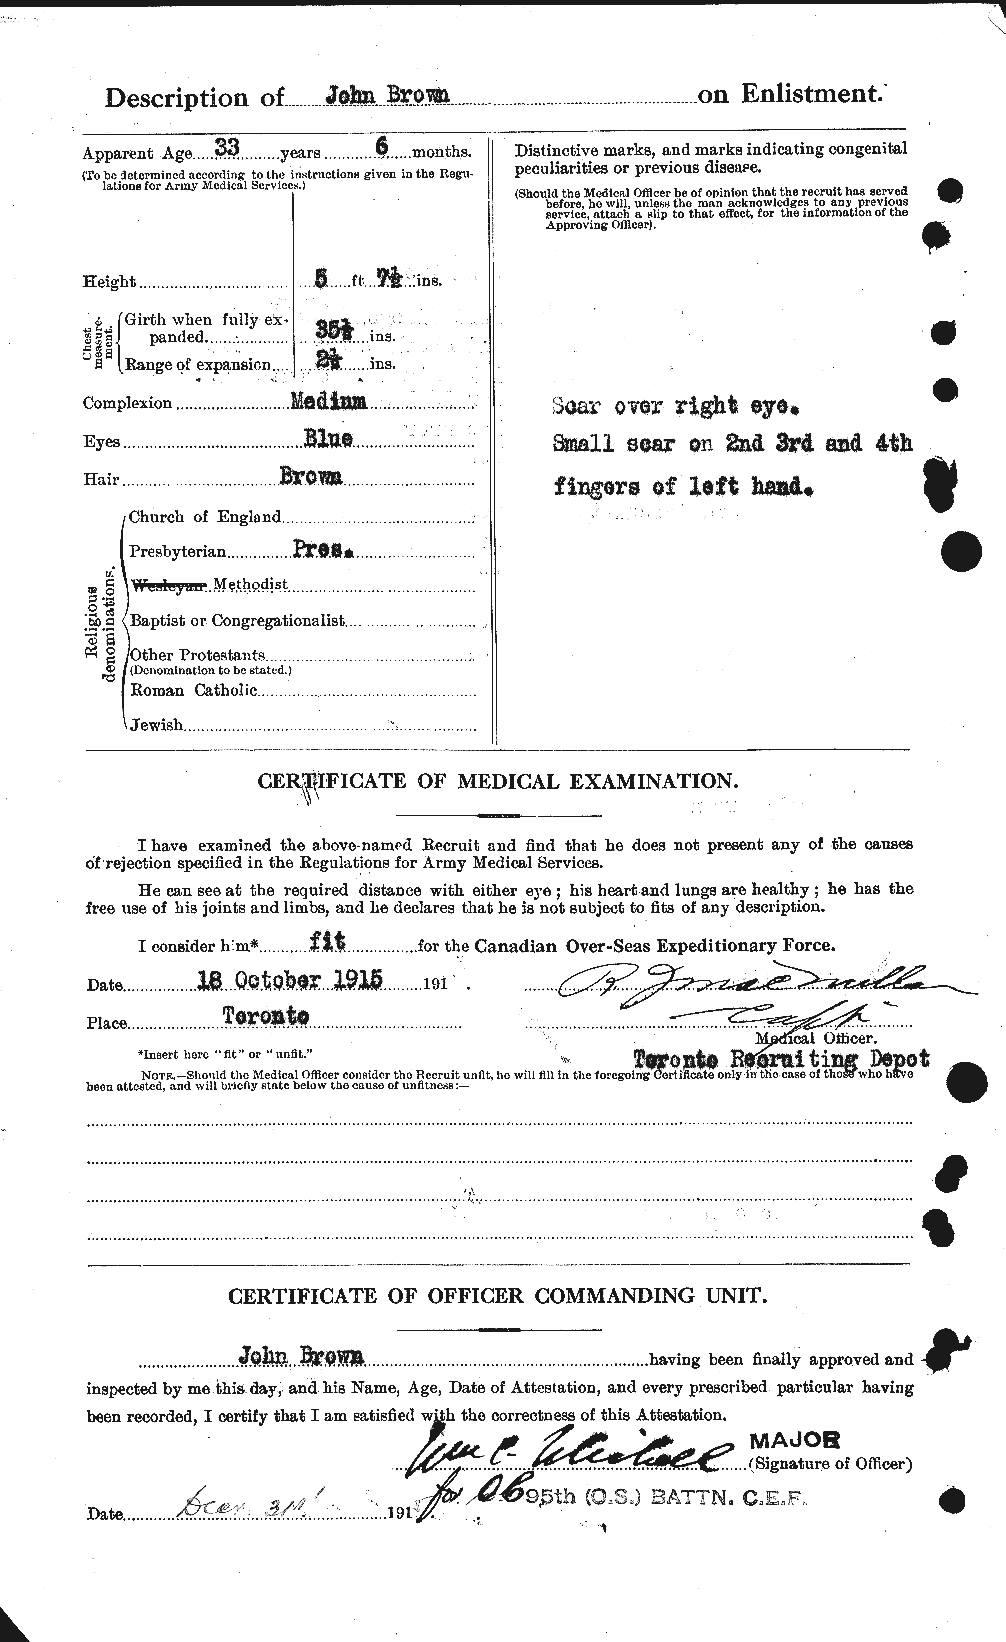 Personnel Records of the First World War - CEF 263885b